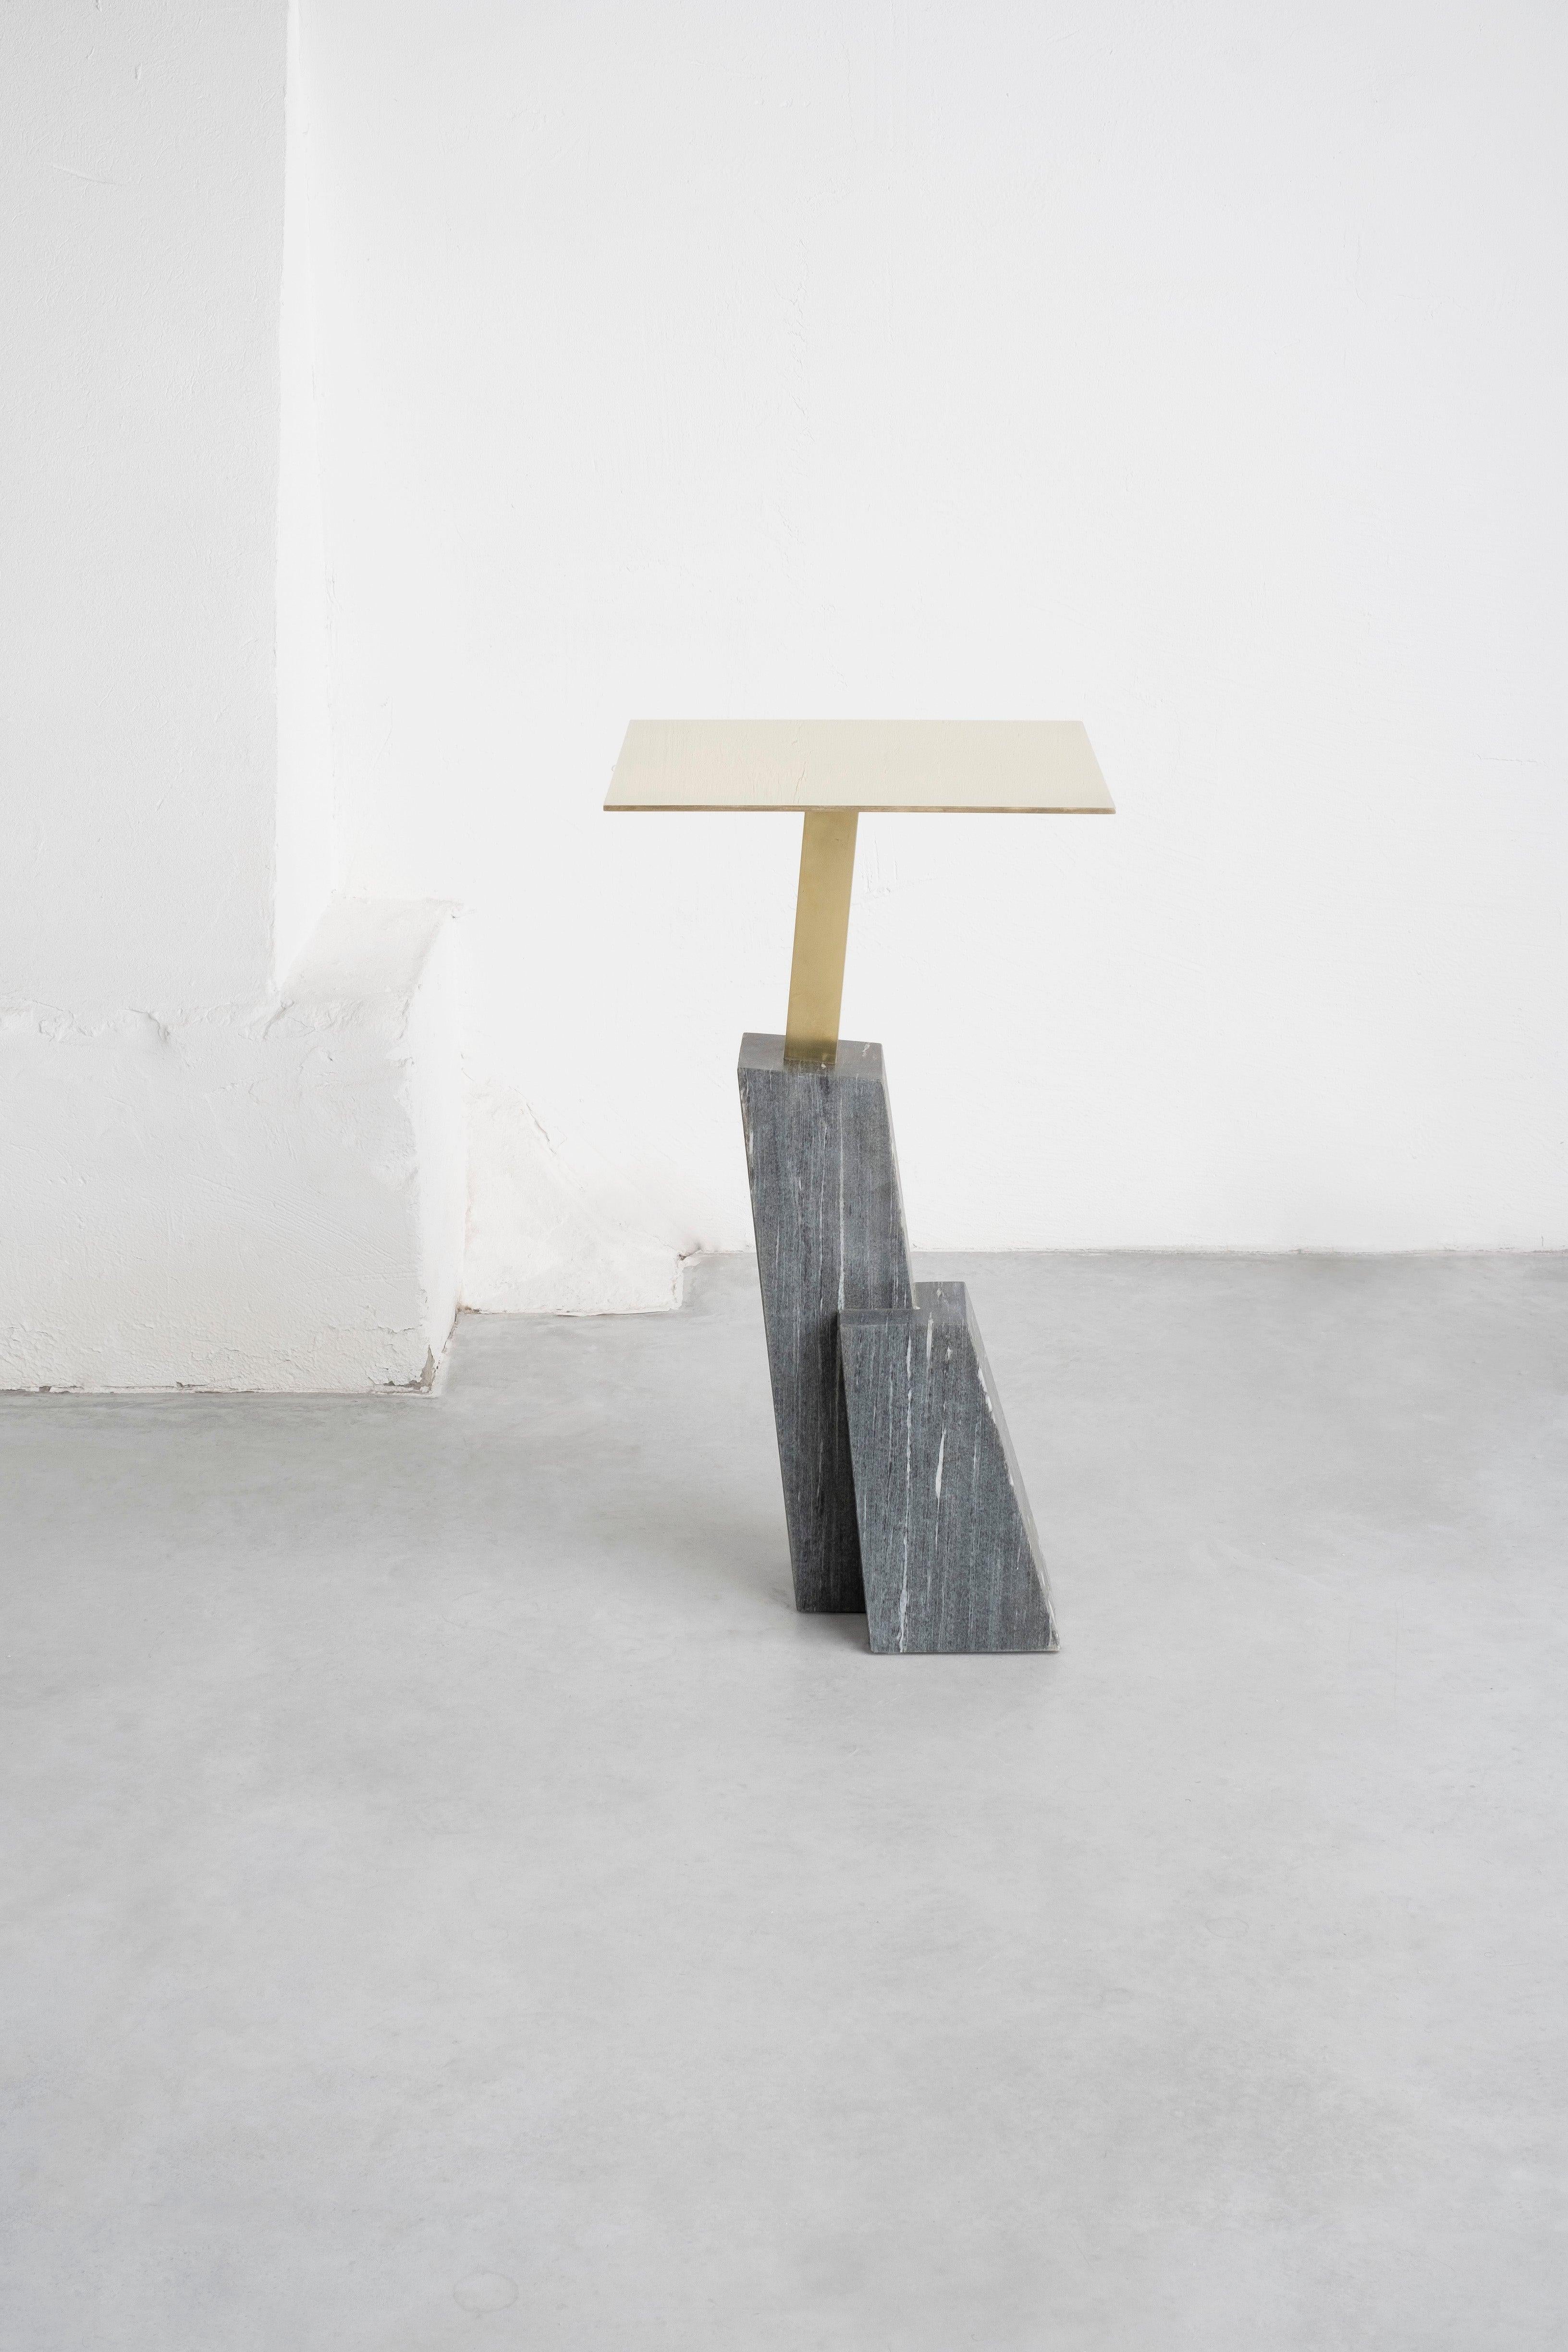 KEP T-table
Marble and brass
Measures: H 68, L 36, W 36 cm
Edition: 8P + 2AP

The Collection ‘Further From Function’ includes seven subtle variations
of a small table ‘IF’ and a limited edition of a sculptural side table ‘KEPT’.
Produced in